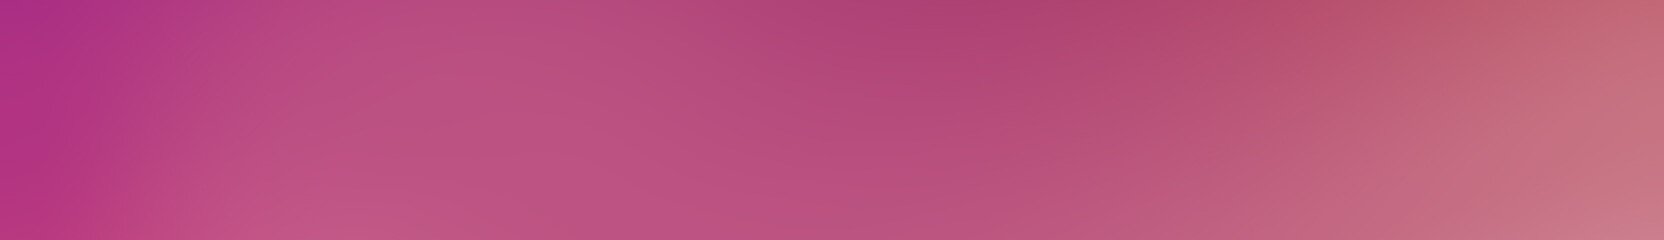 A pink and purple gradient background.